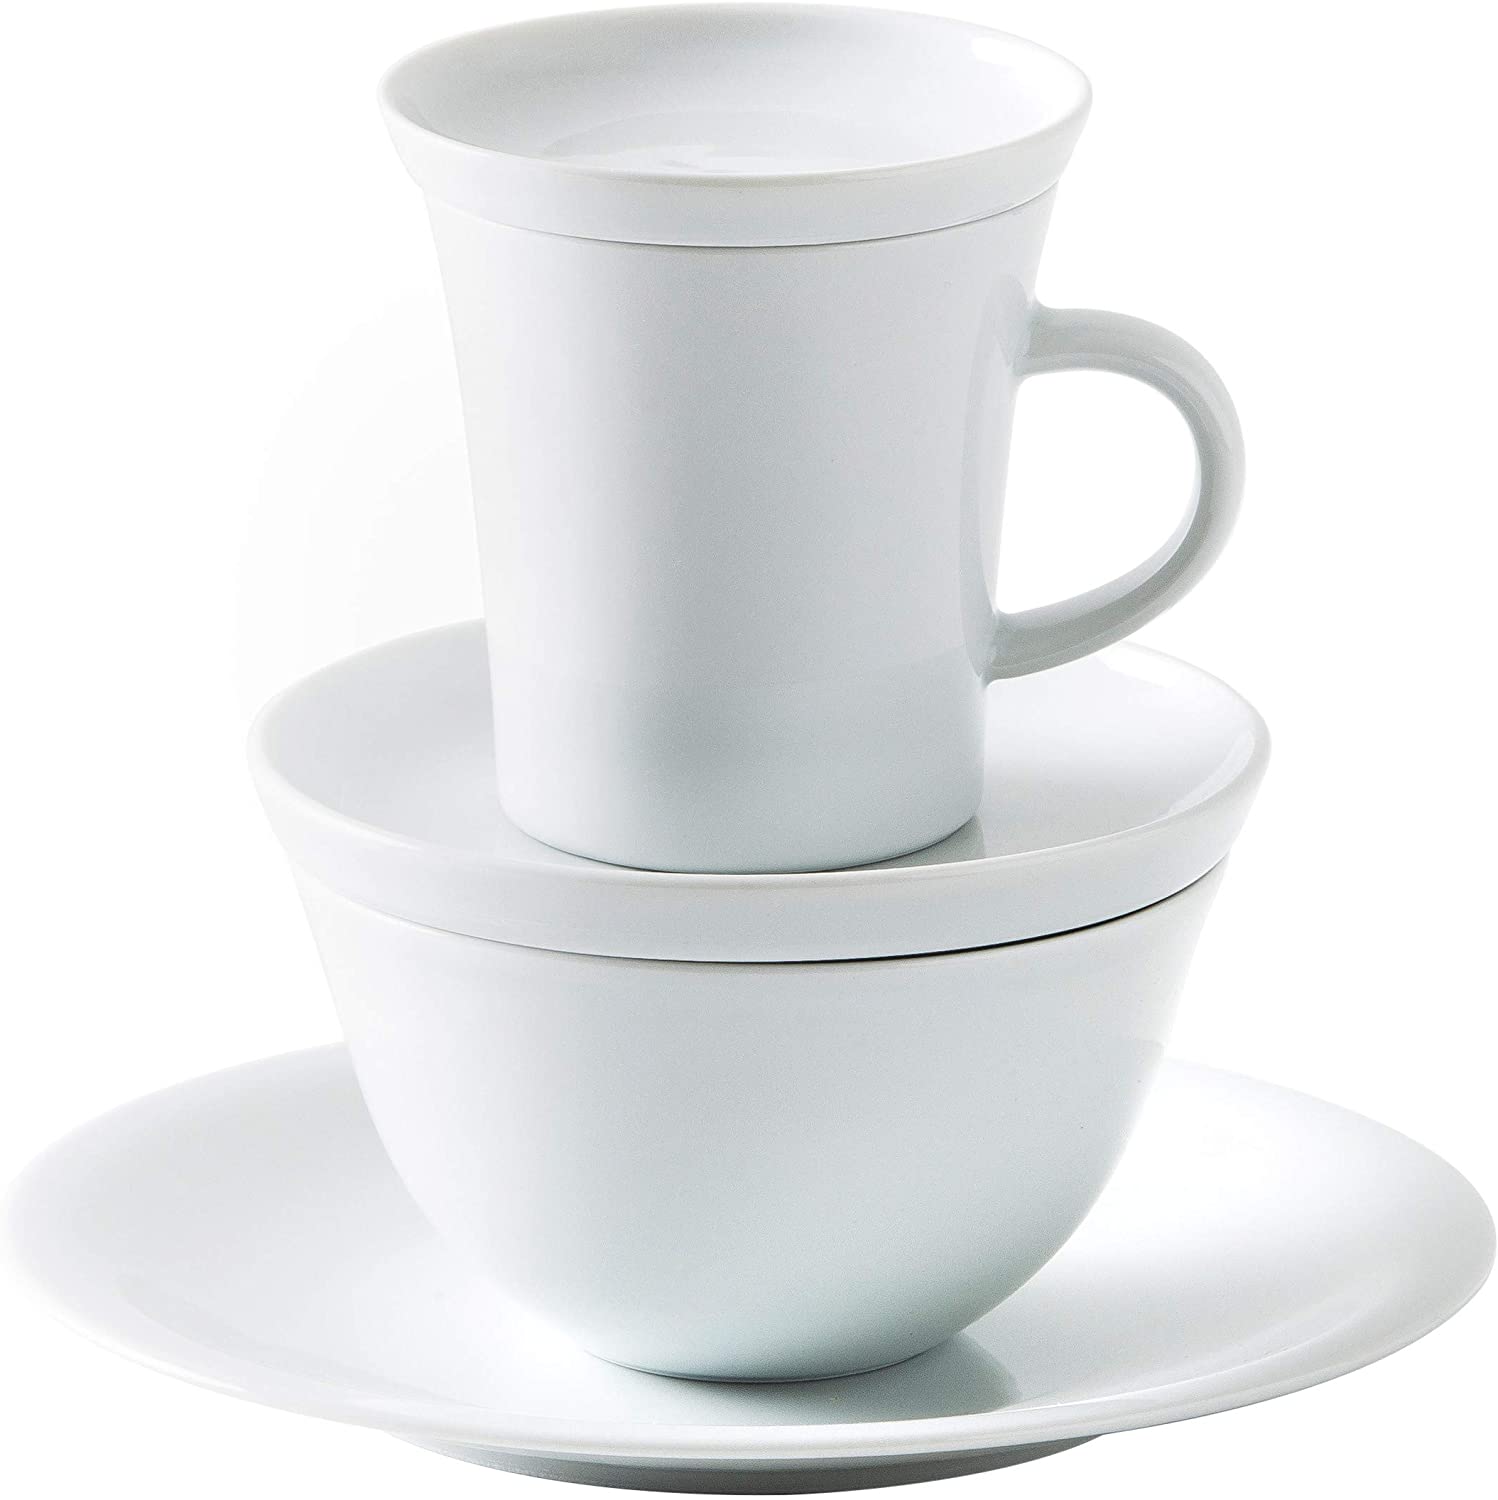 Kahla MG Update 32G219A90032C 10-Piece Short Set Porcelain Crockery for Two People with Mug to Go White